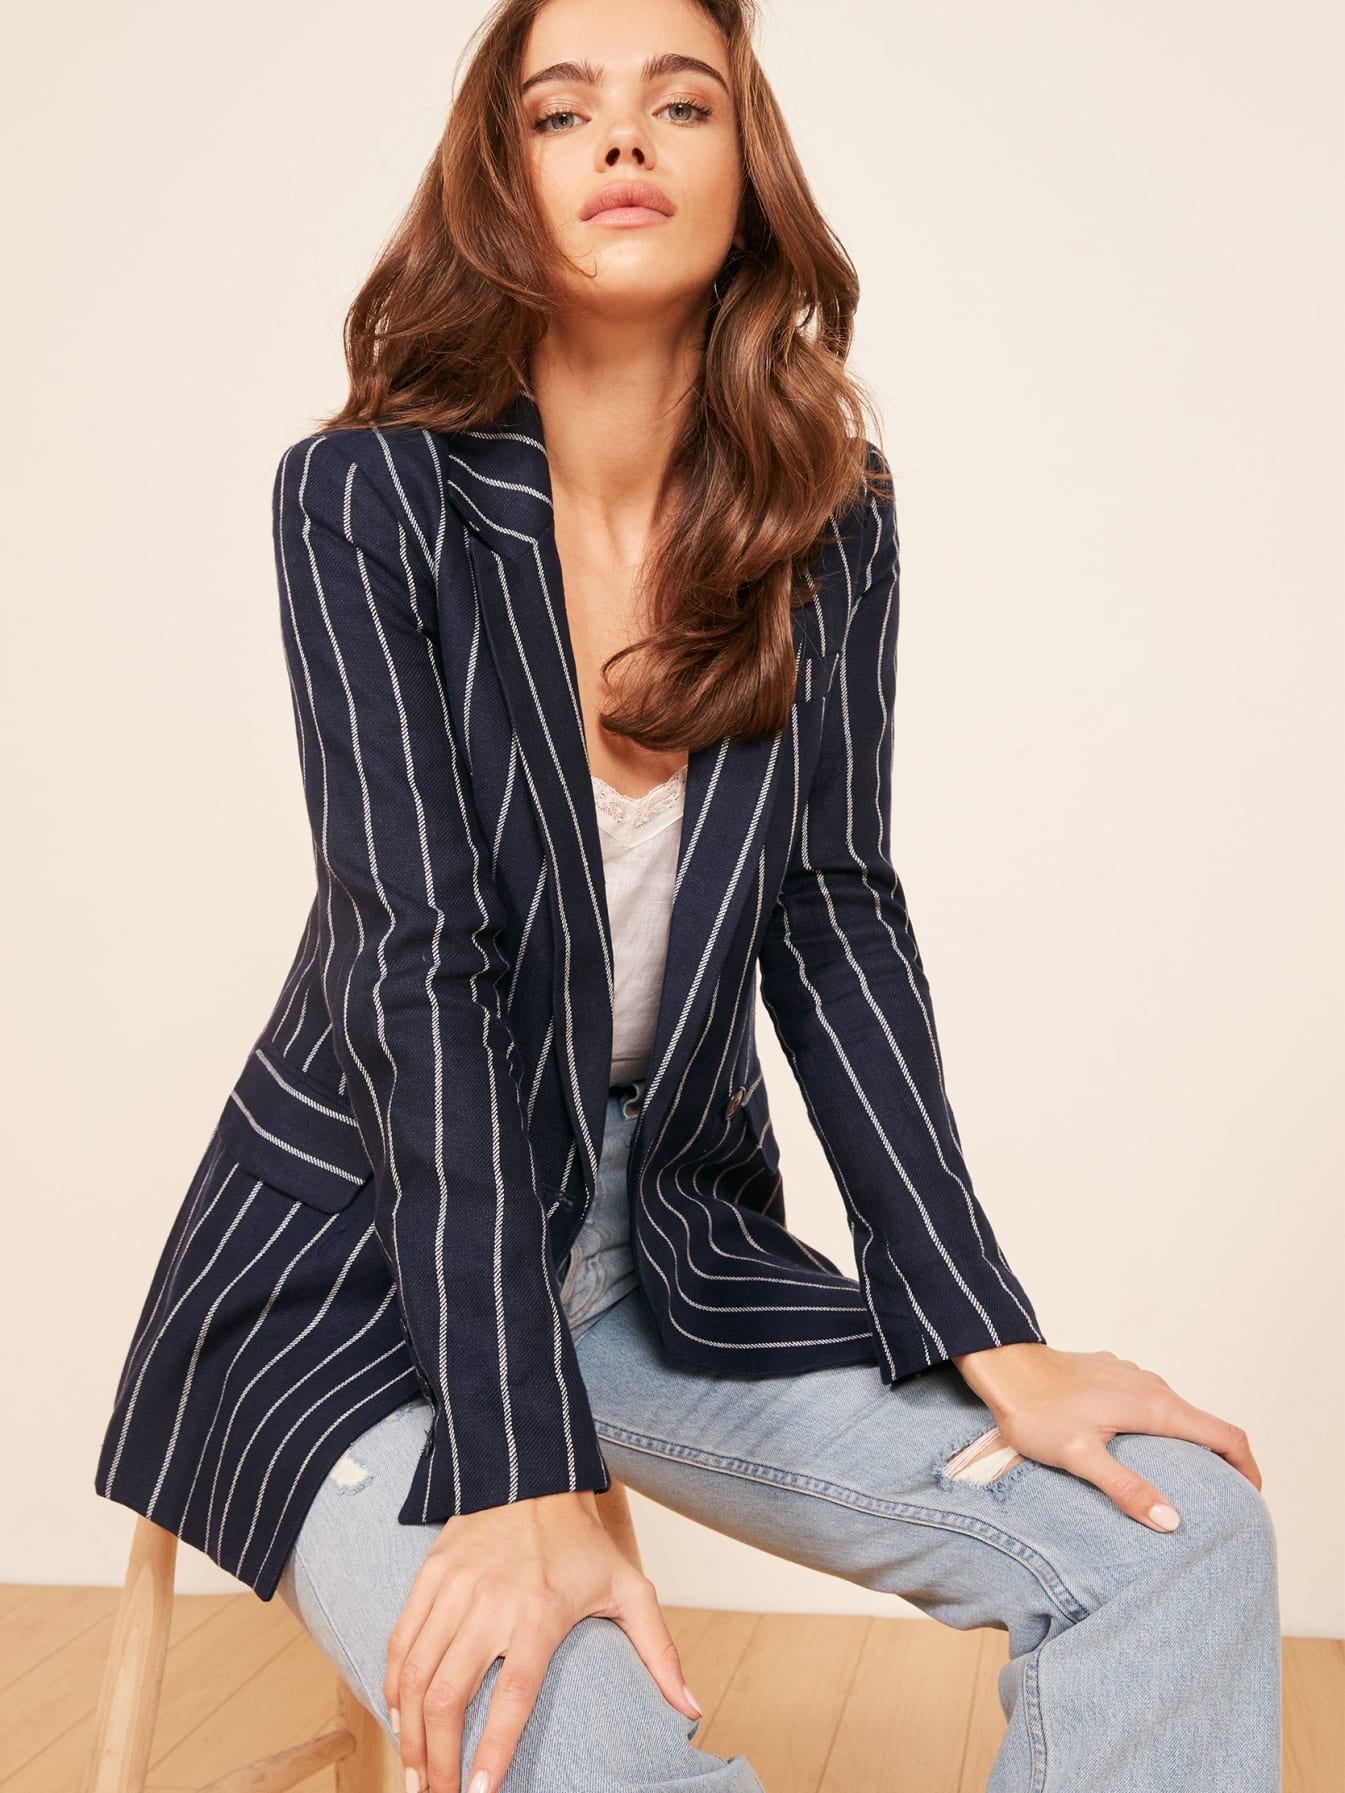 Reformation Verano Blazer | Your Fall Wardrobe Won't Be Complete Without 1 of These Blazers — Starting at Just $35 | POPSUGAR Fashion Photo 6